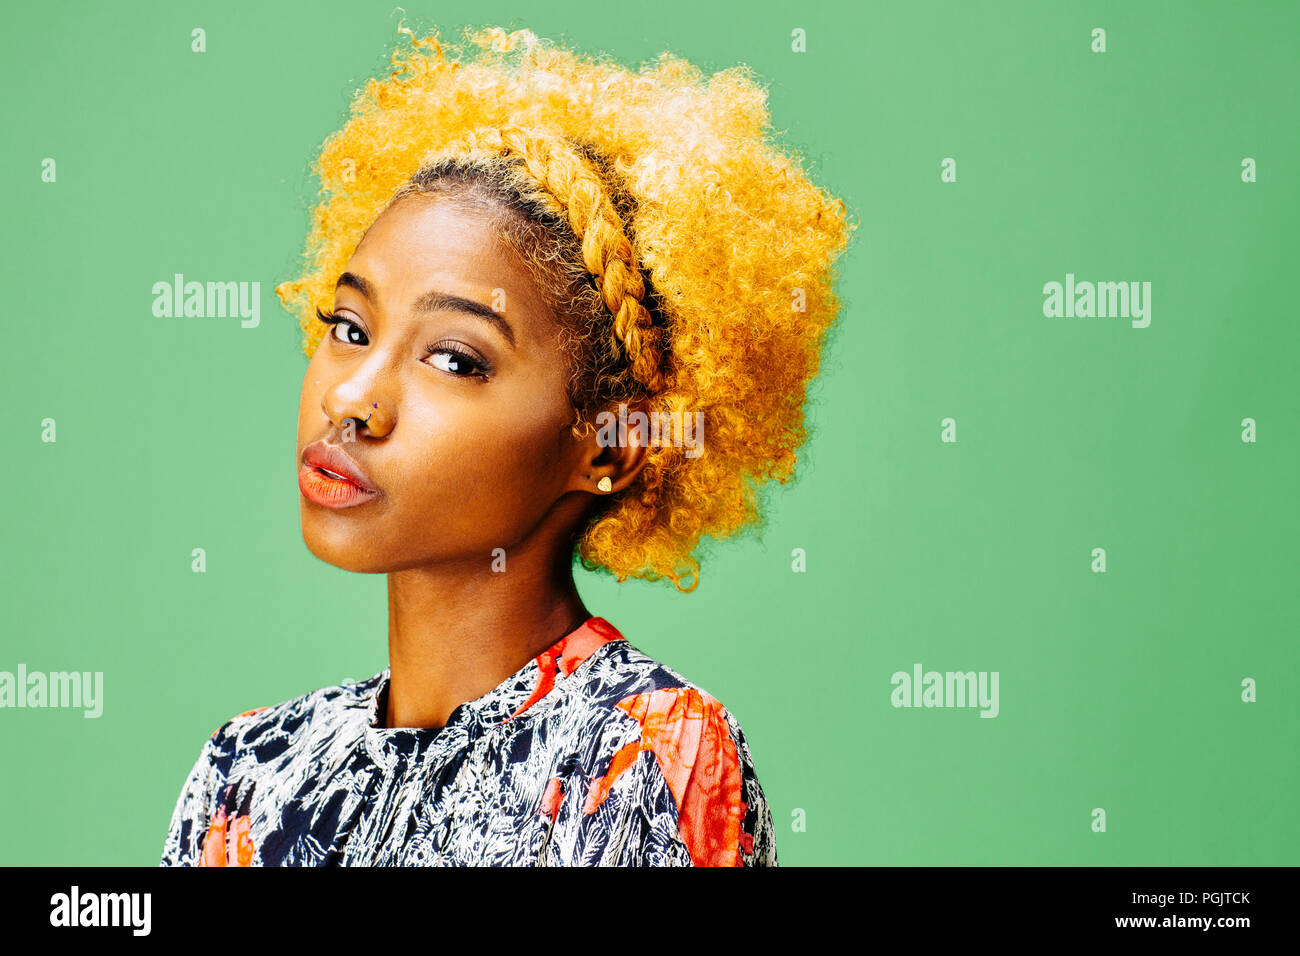 Portrait of a lovely young girl with bleached curly hair, in front of a green background Stock Photo